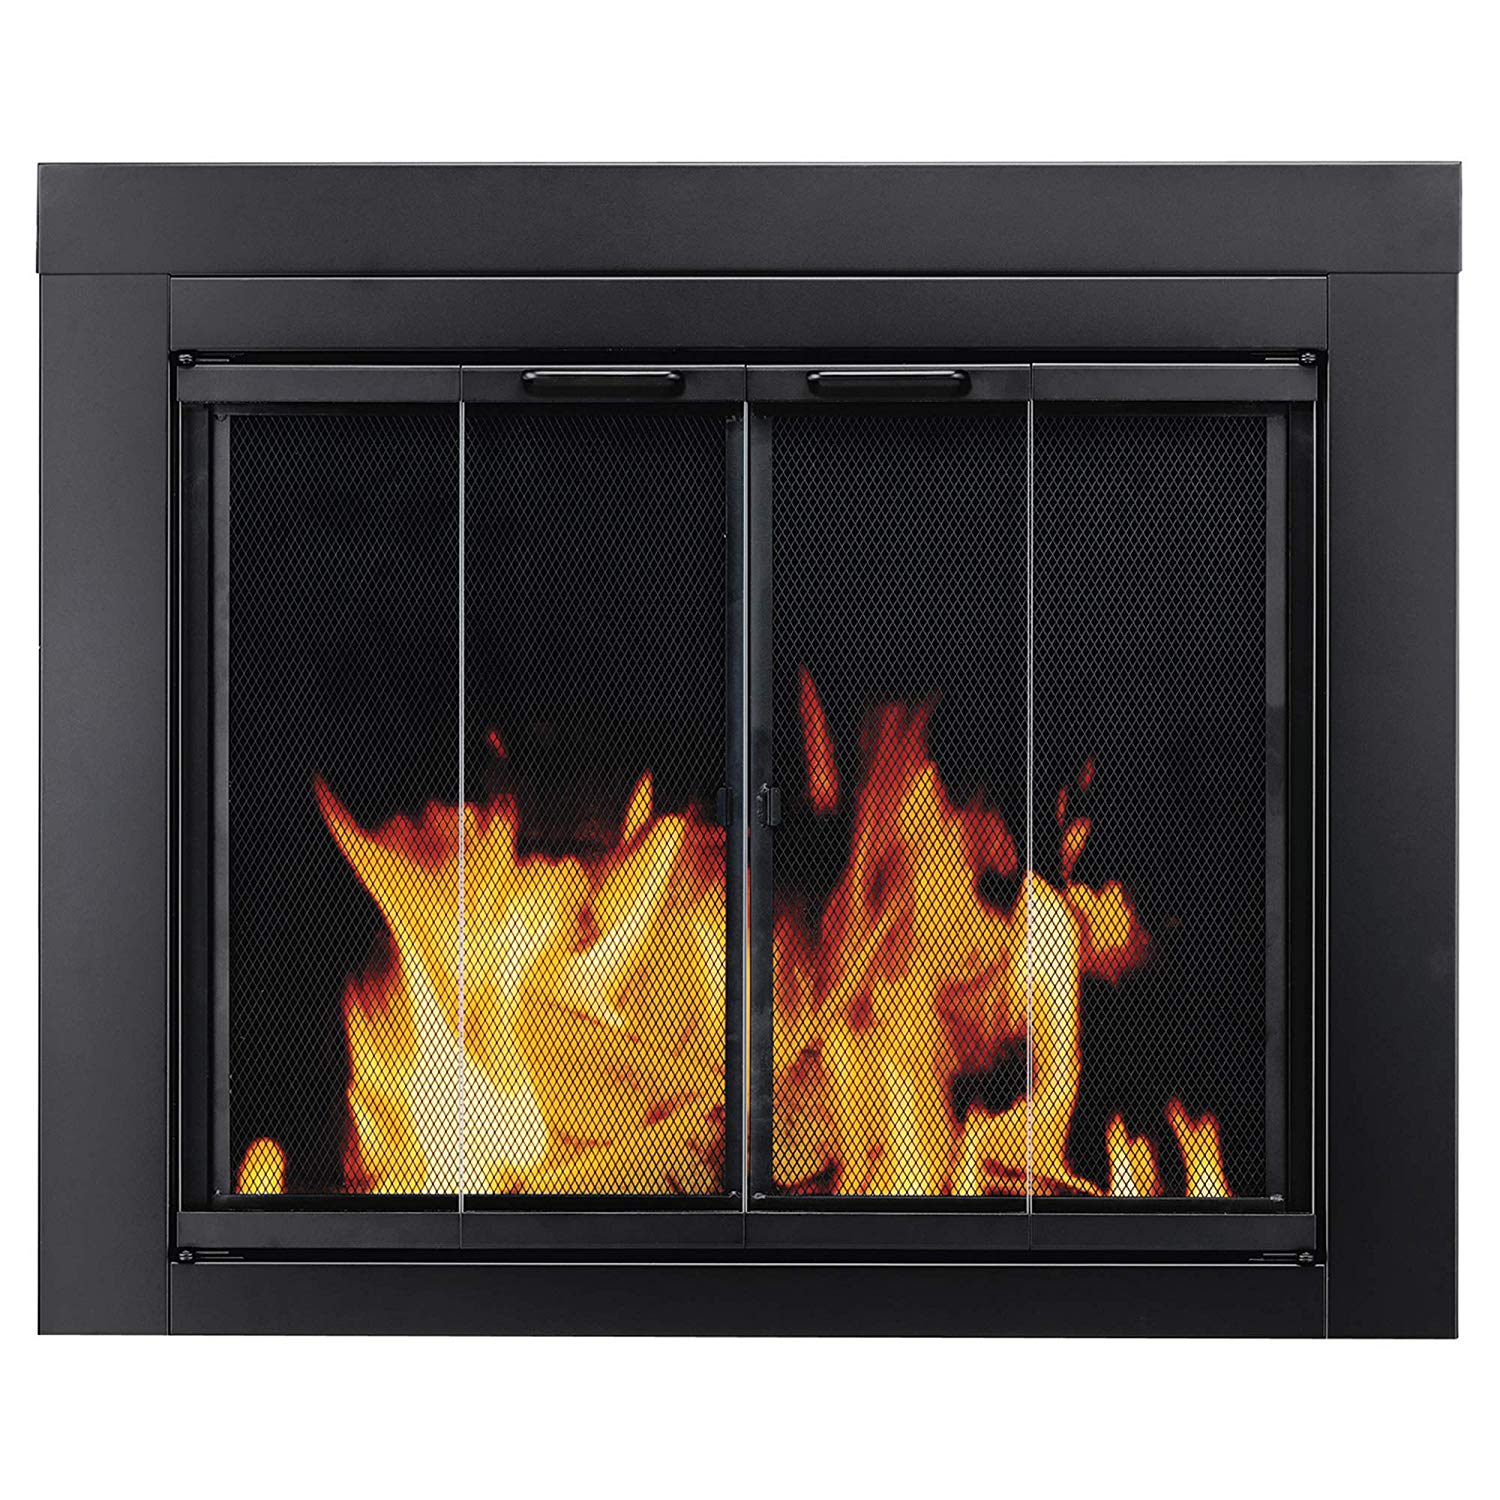 Fireplace for Your Home Best Of Pleasant Hearth at 1000 ascot Fireplace Glass Door Black Small